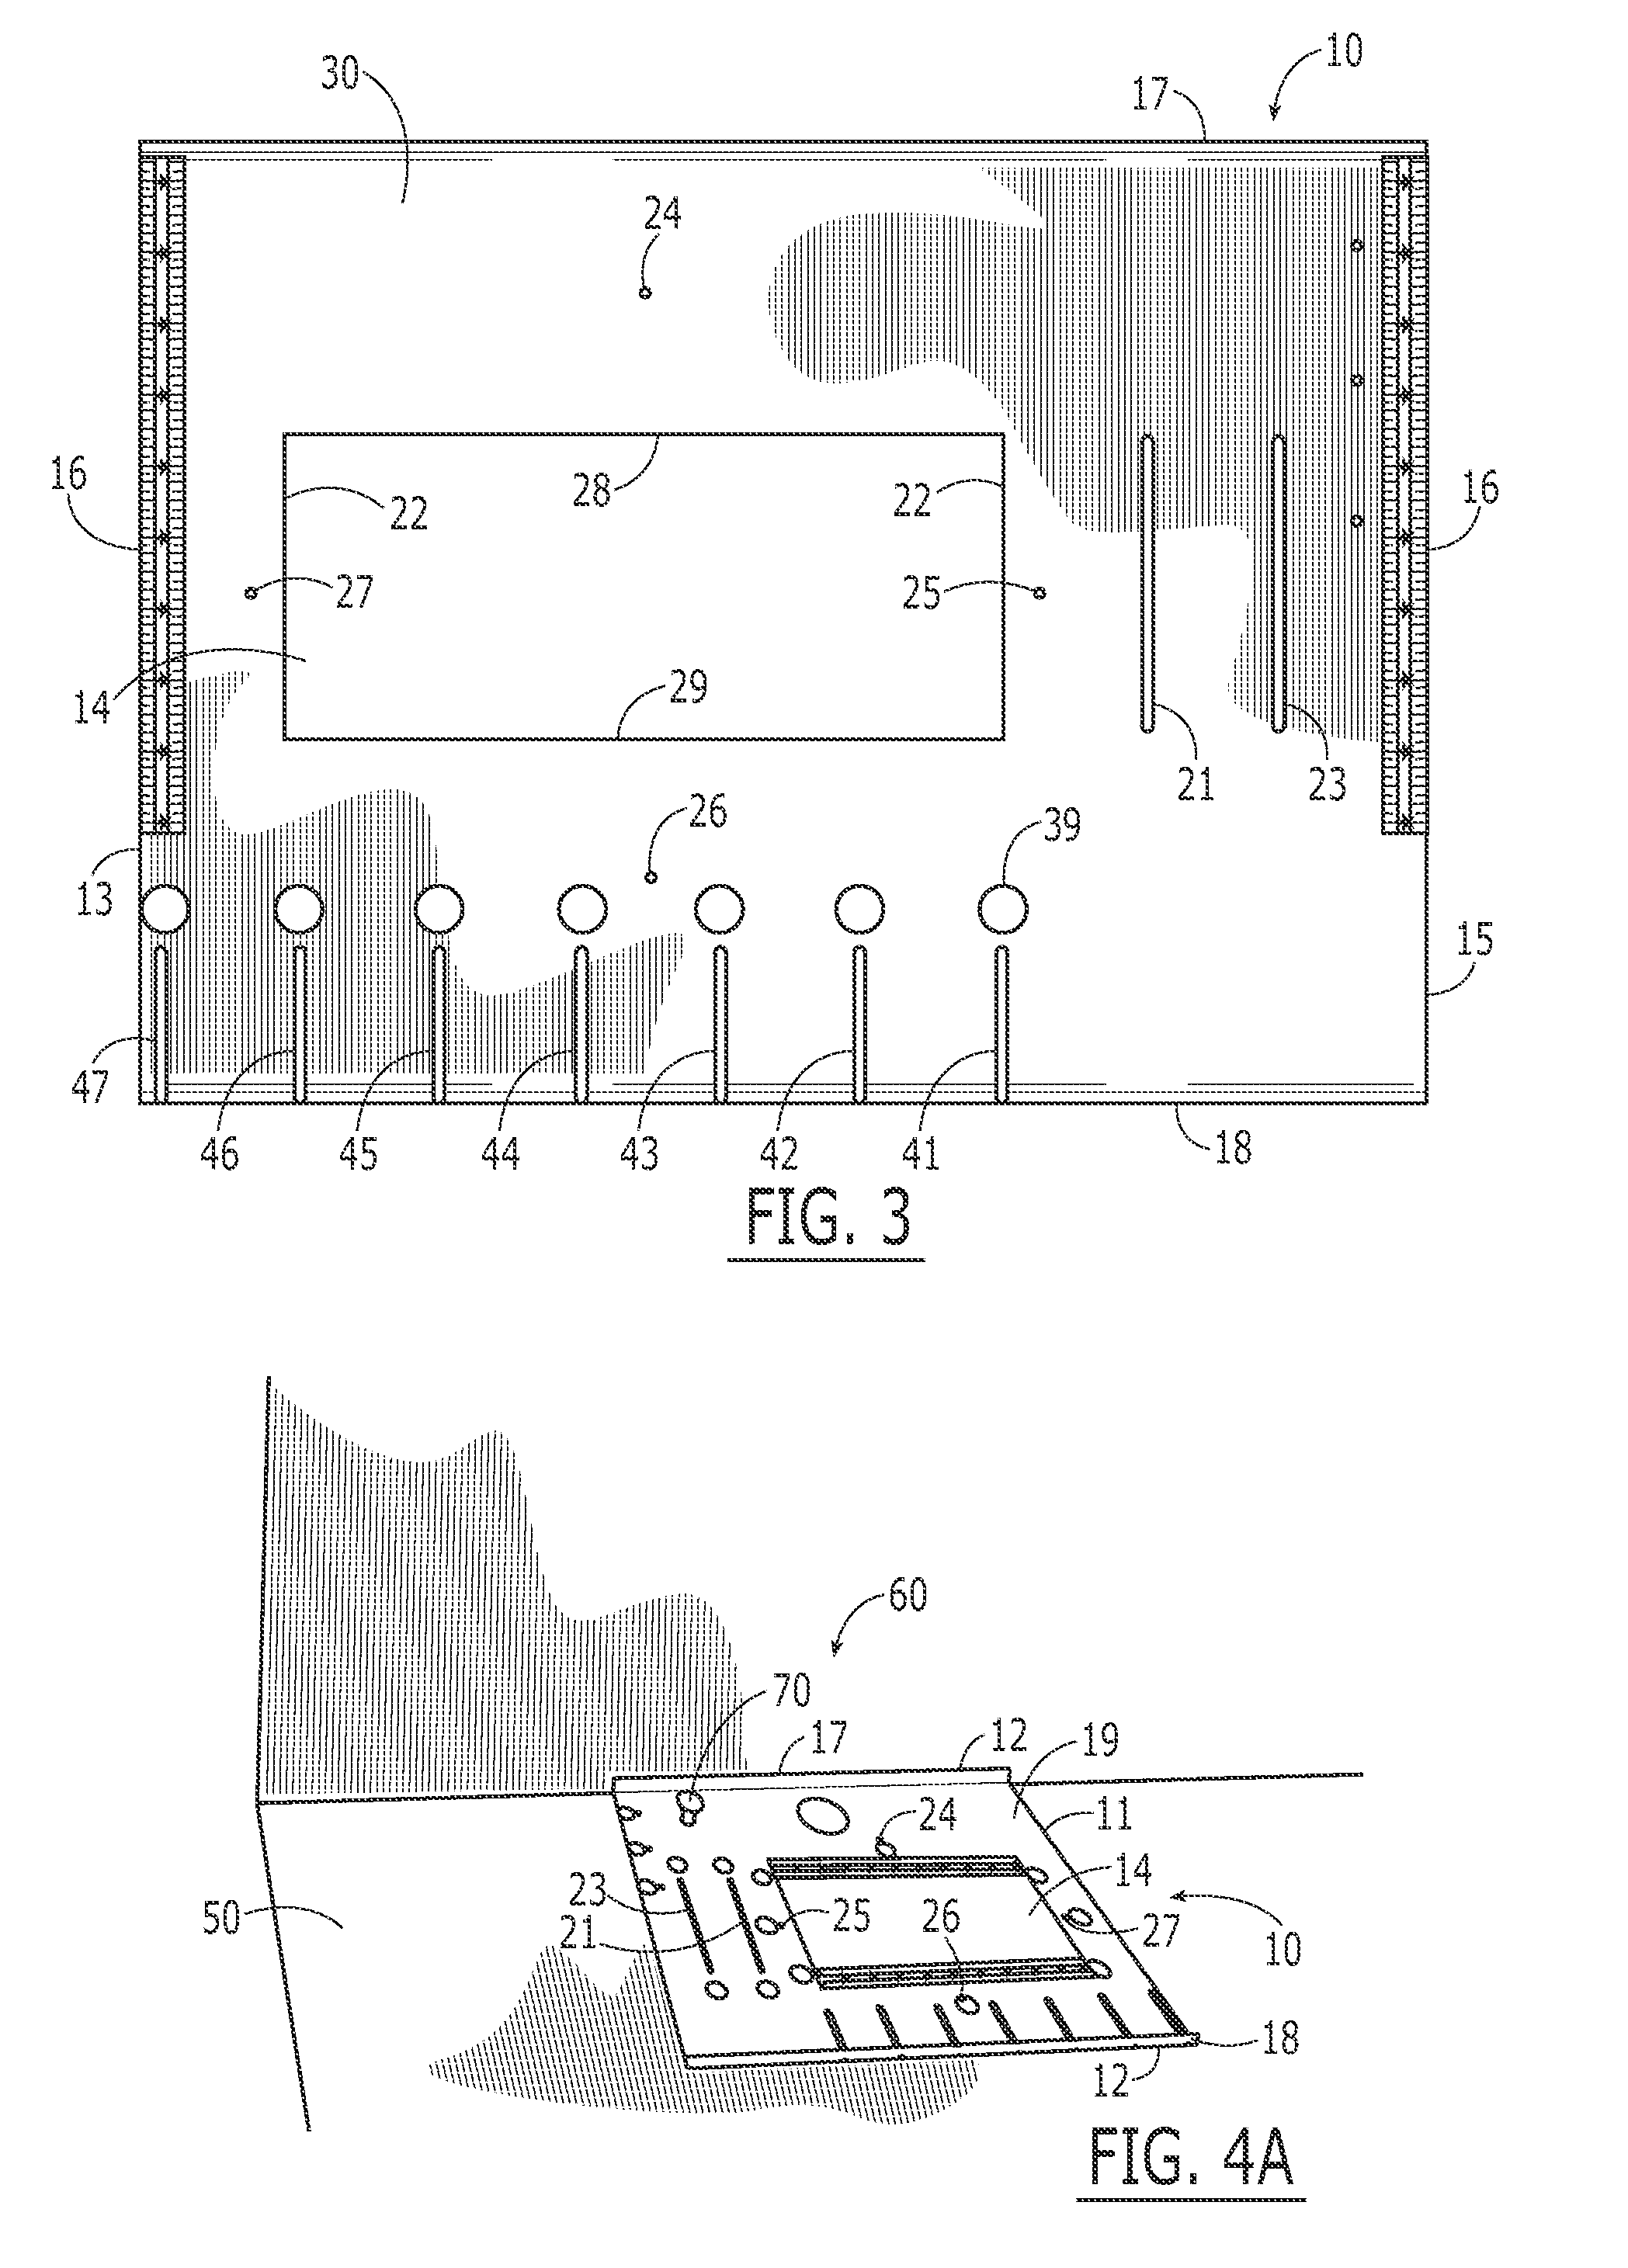 Template for positioning vents or boots for an HVAC system